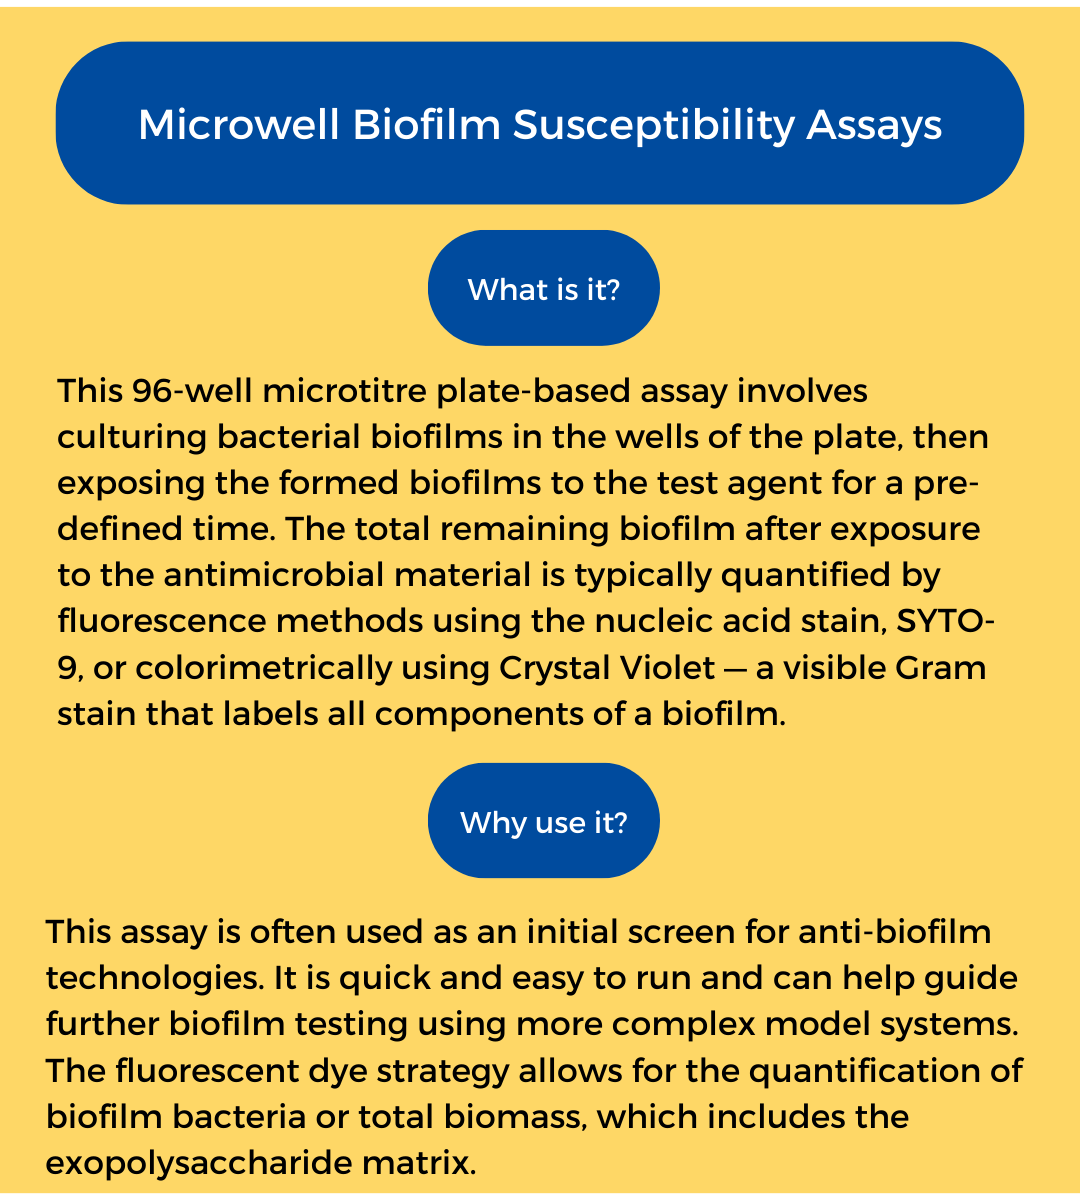 Microwell Biofilm Susceptibility Assays